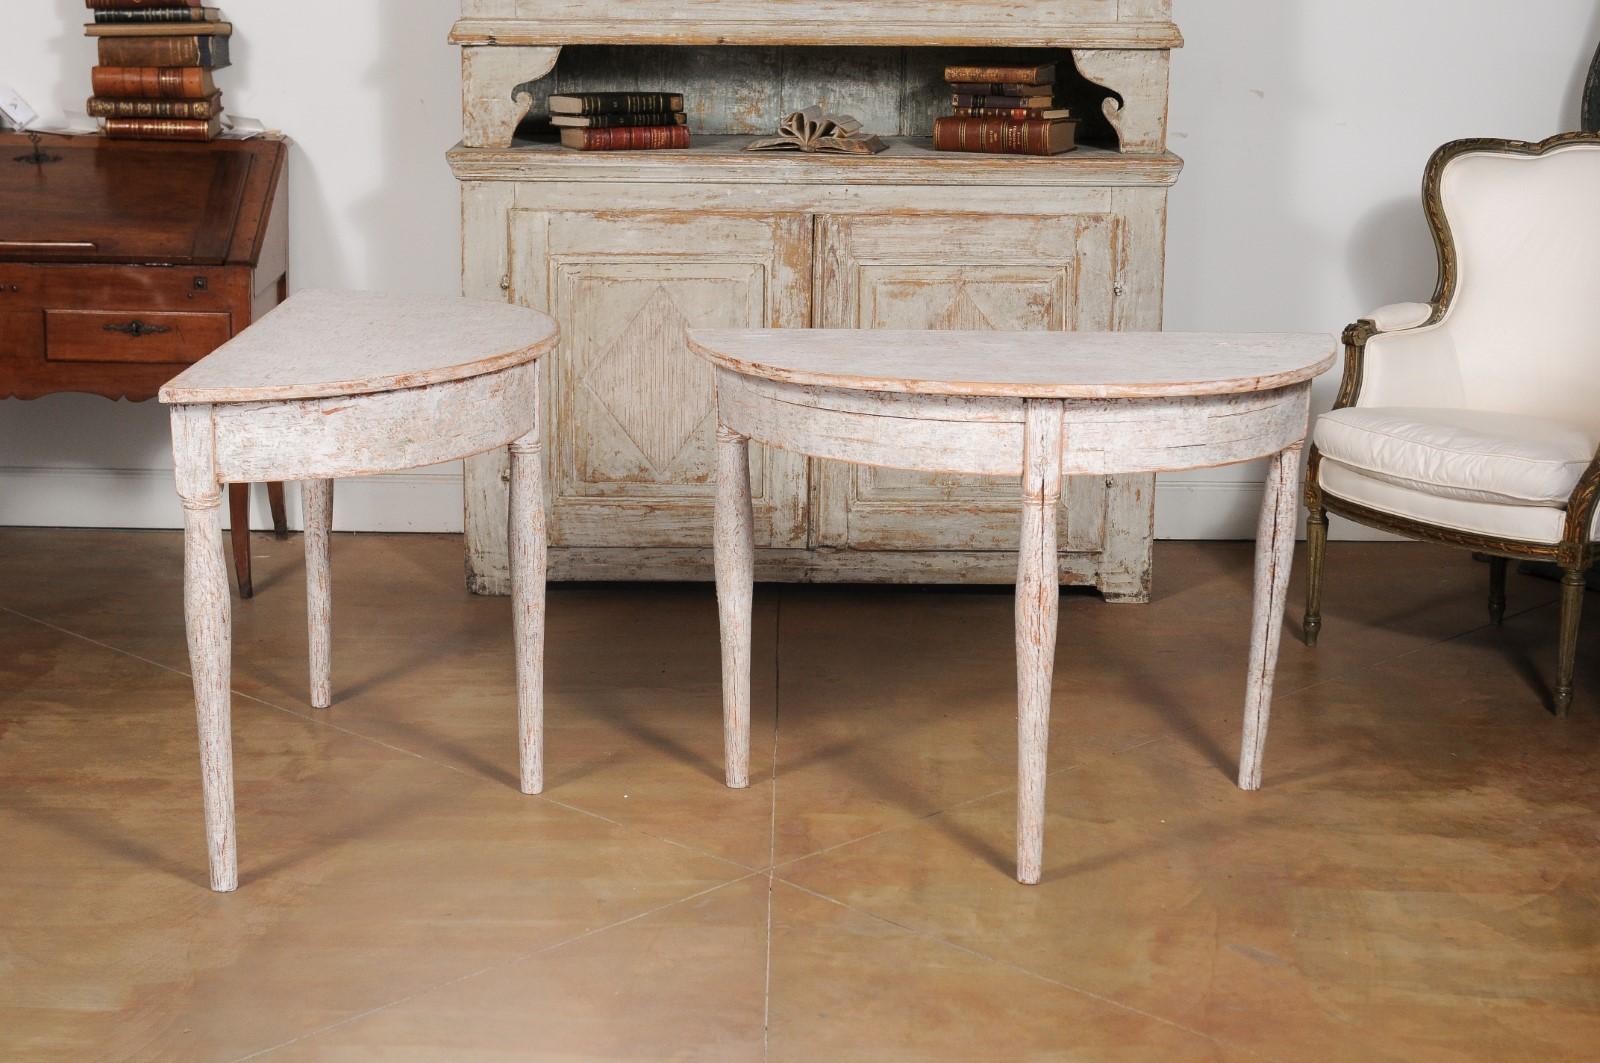 Pair of 1840s Swedish Painted Wood Demilune Tables with Distressed Finish 1